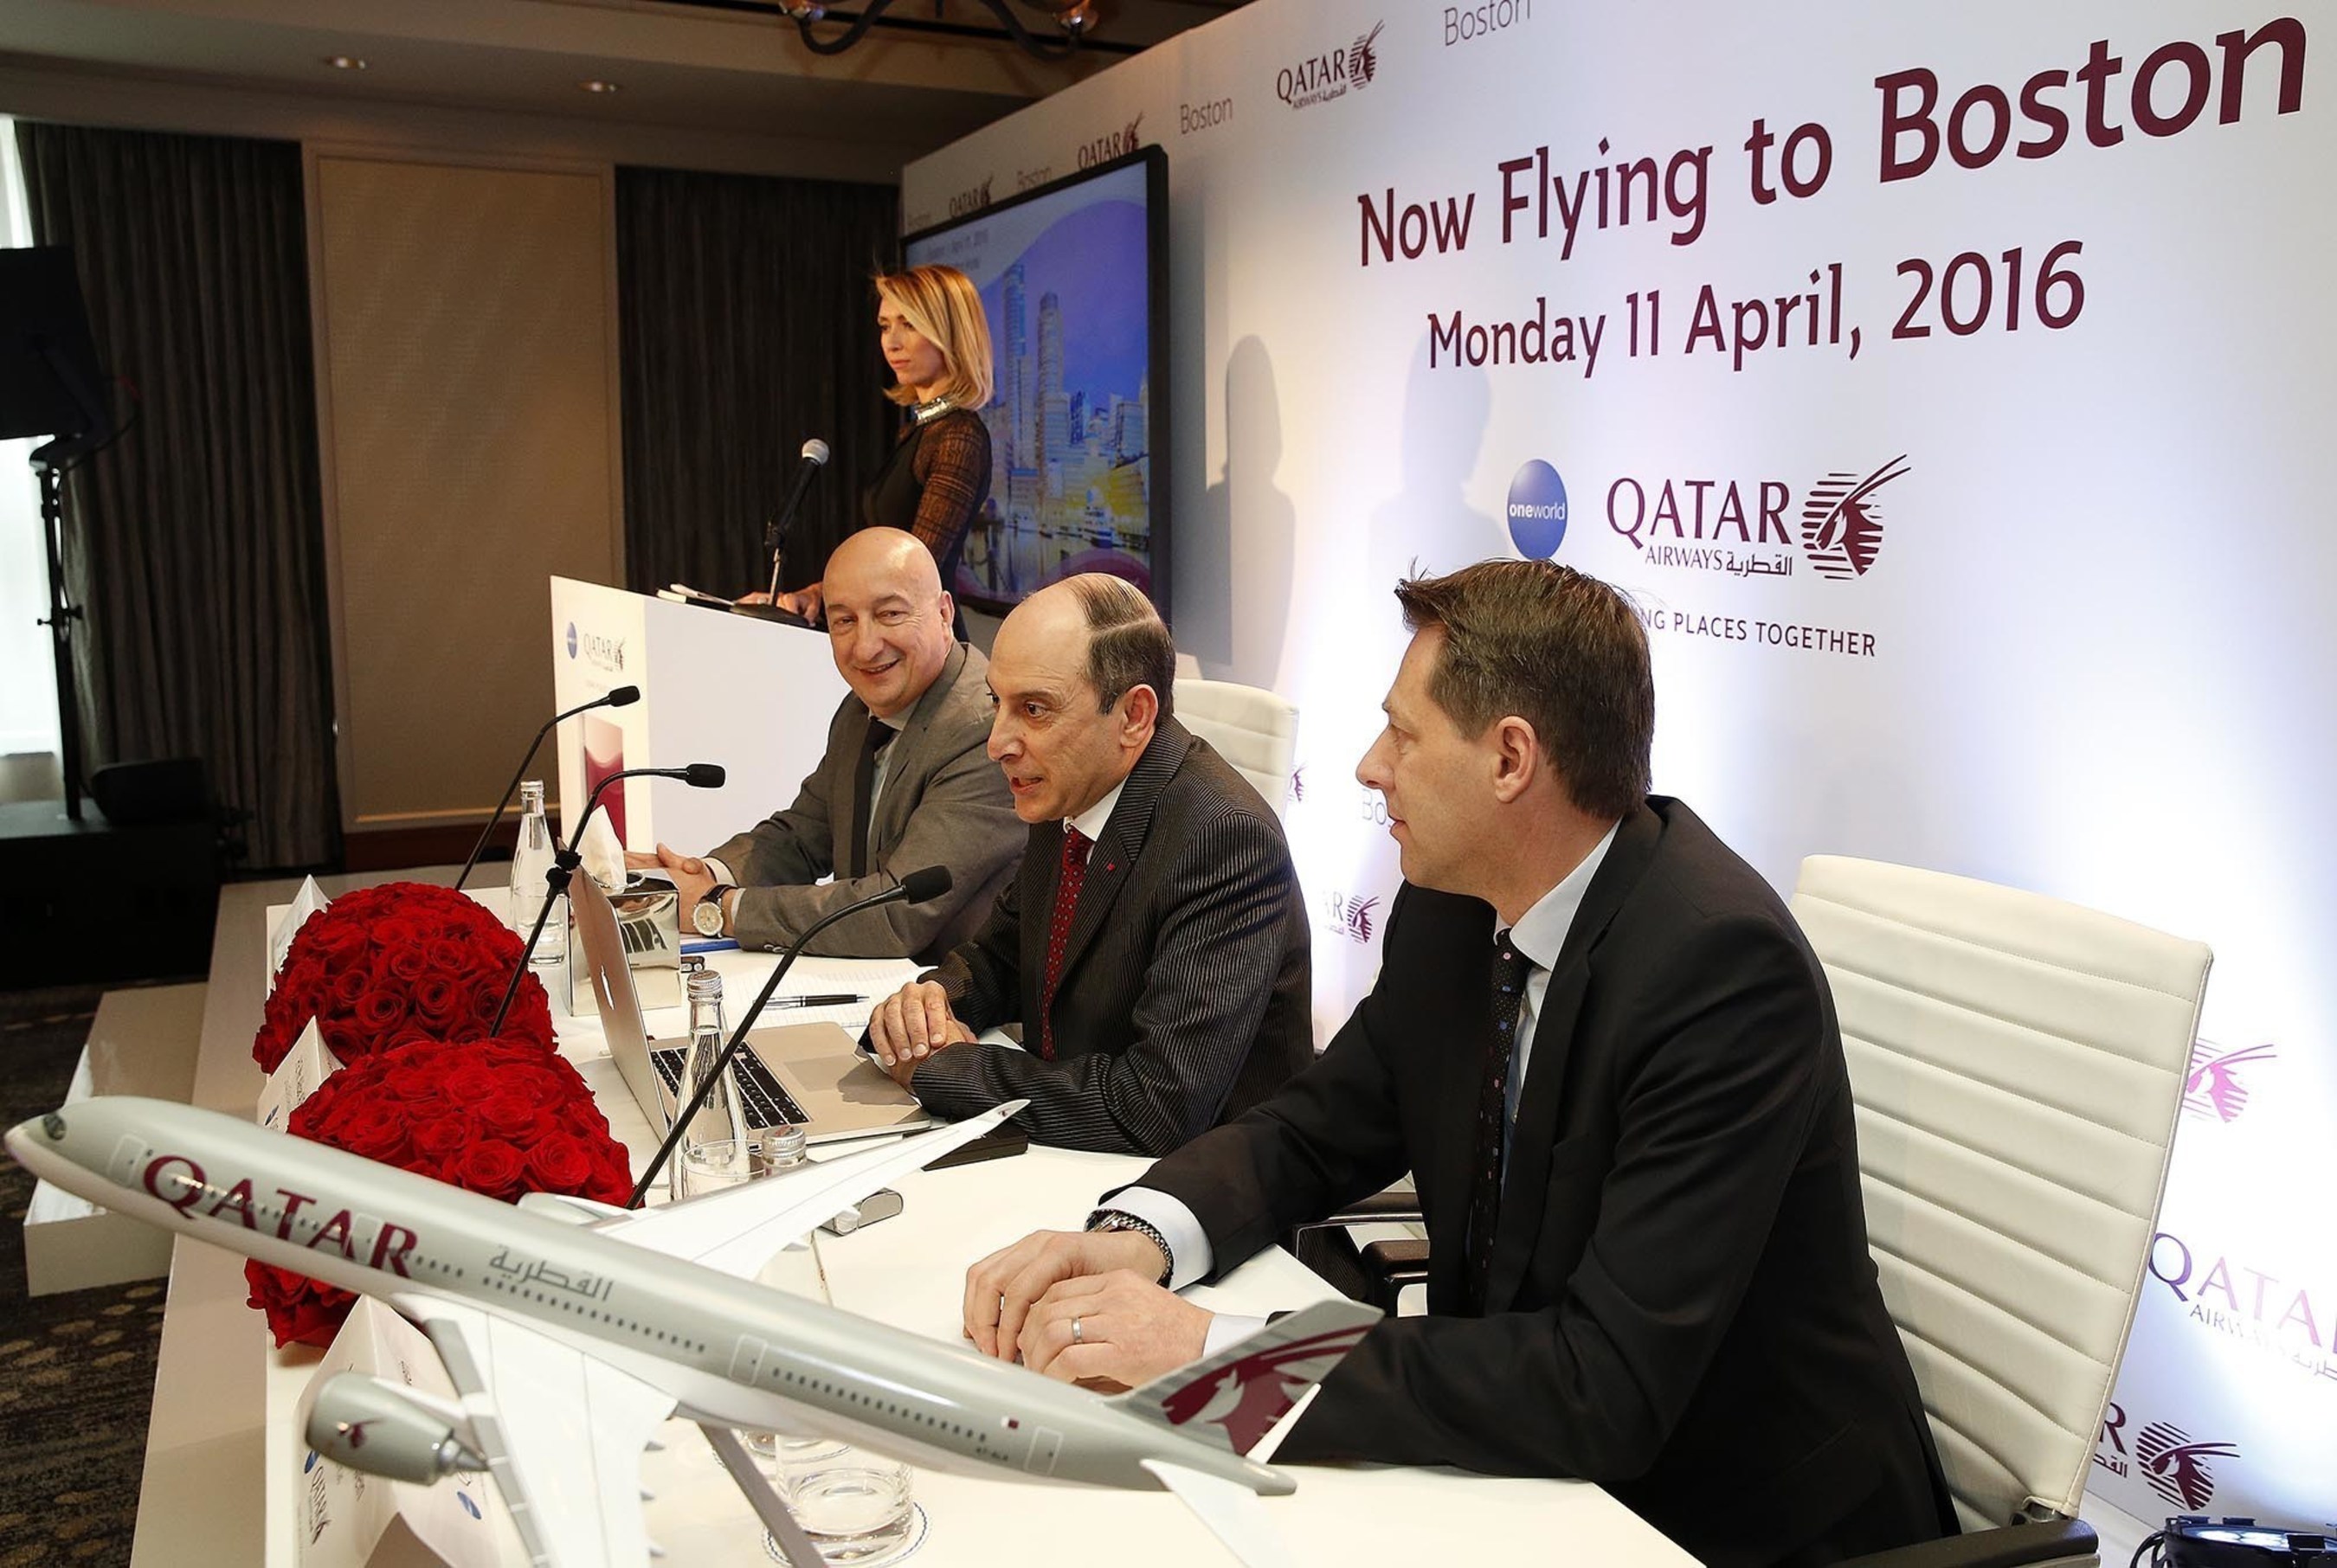 Giuliana Rancic emcees Qatar Airways' press conference in Boston where the airline's Group Chief Executive H.E. Mr. Akbar Al Baker (centre) presents on the airline's latest developments. With him are the airline Chief Commercial Officer, Dr. Hugh Dunleavy (left) and Vice President The Americas, Mr. Gunter Saurwein